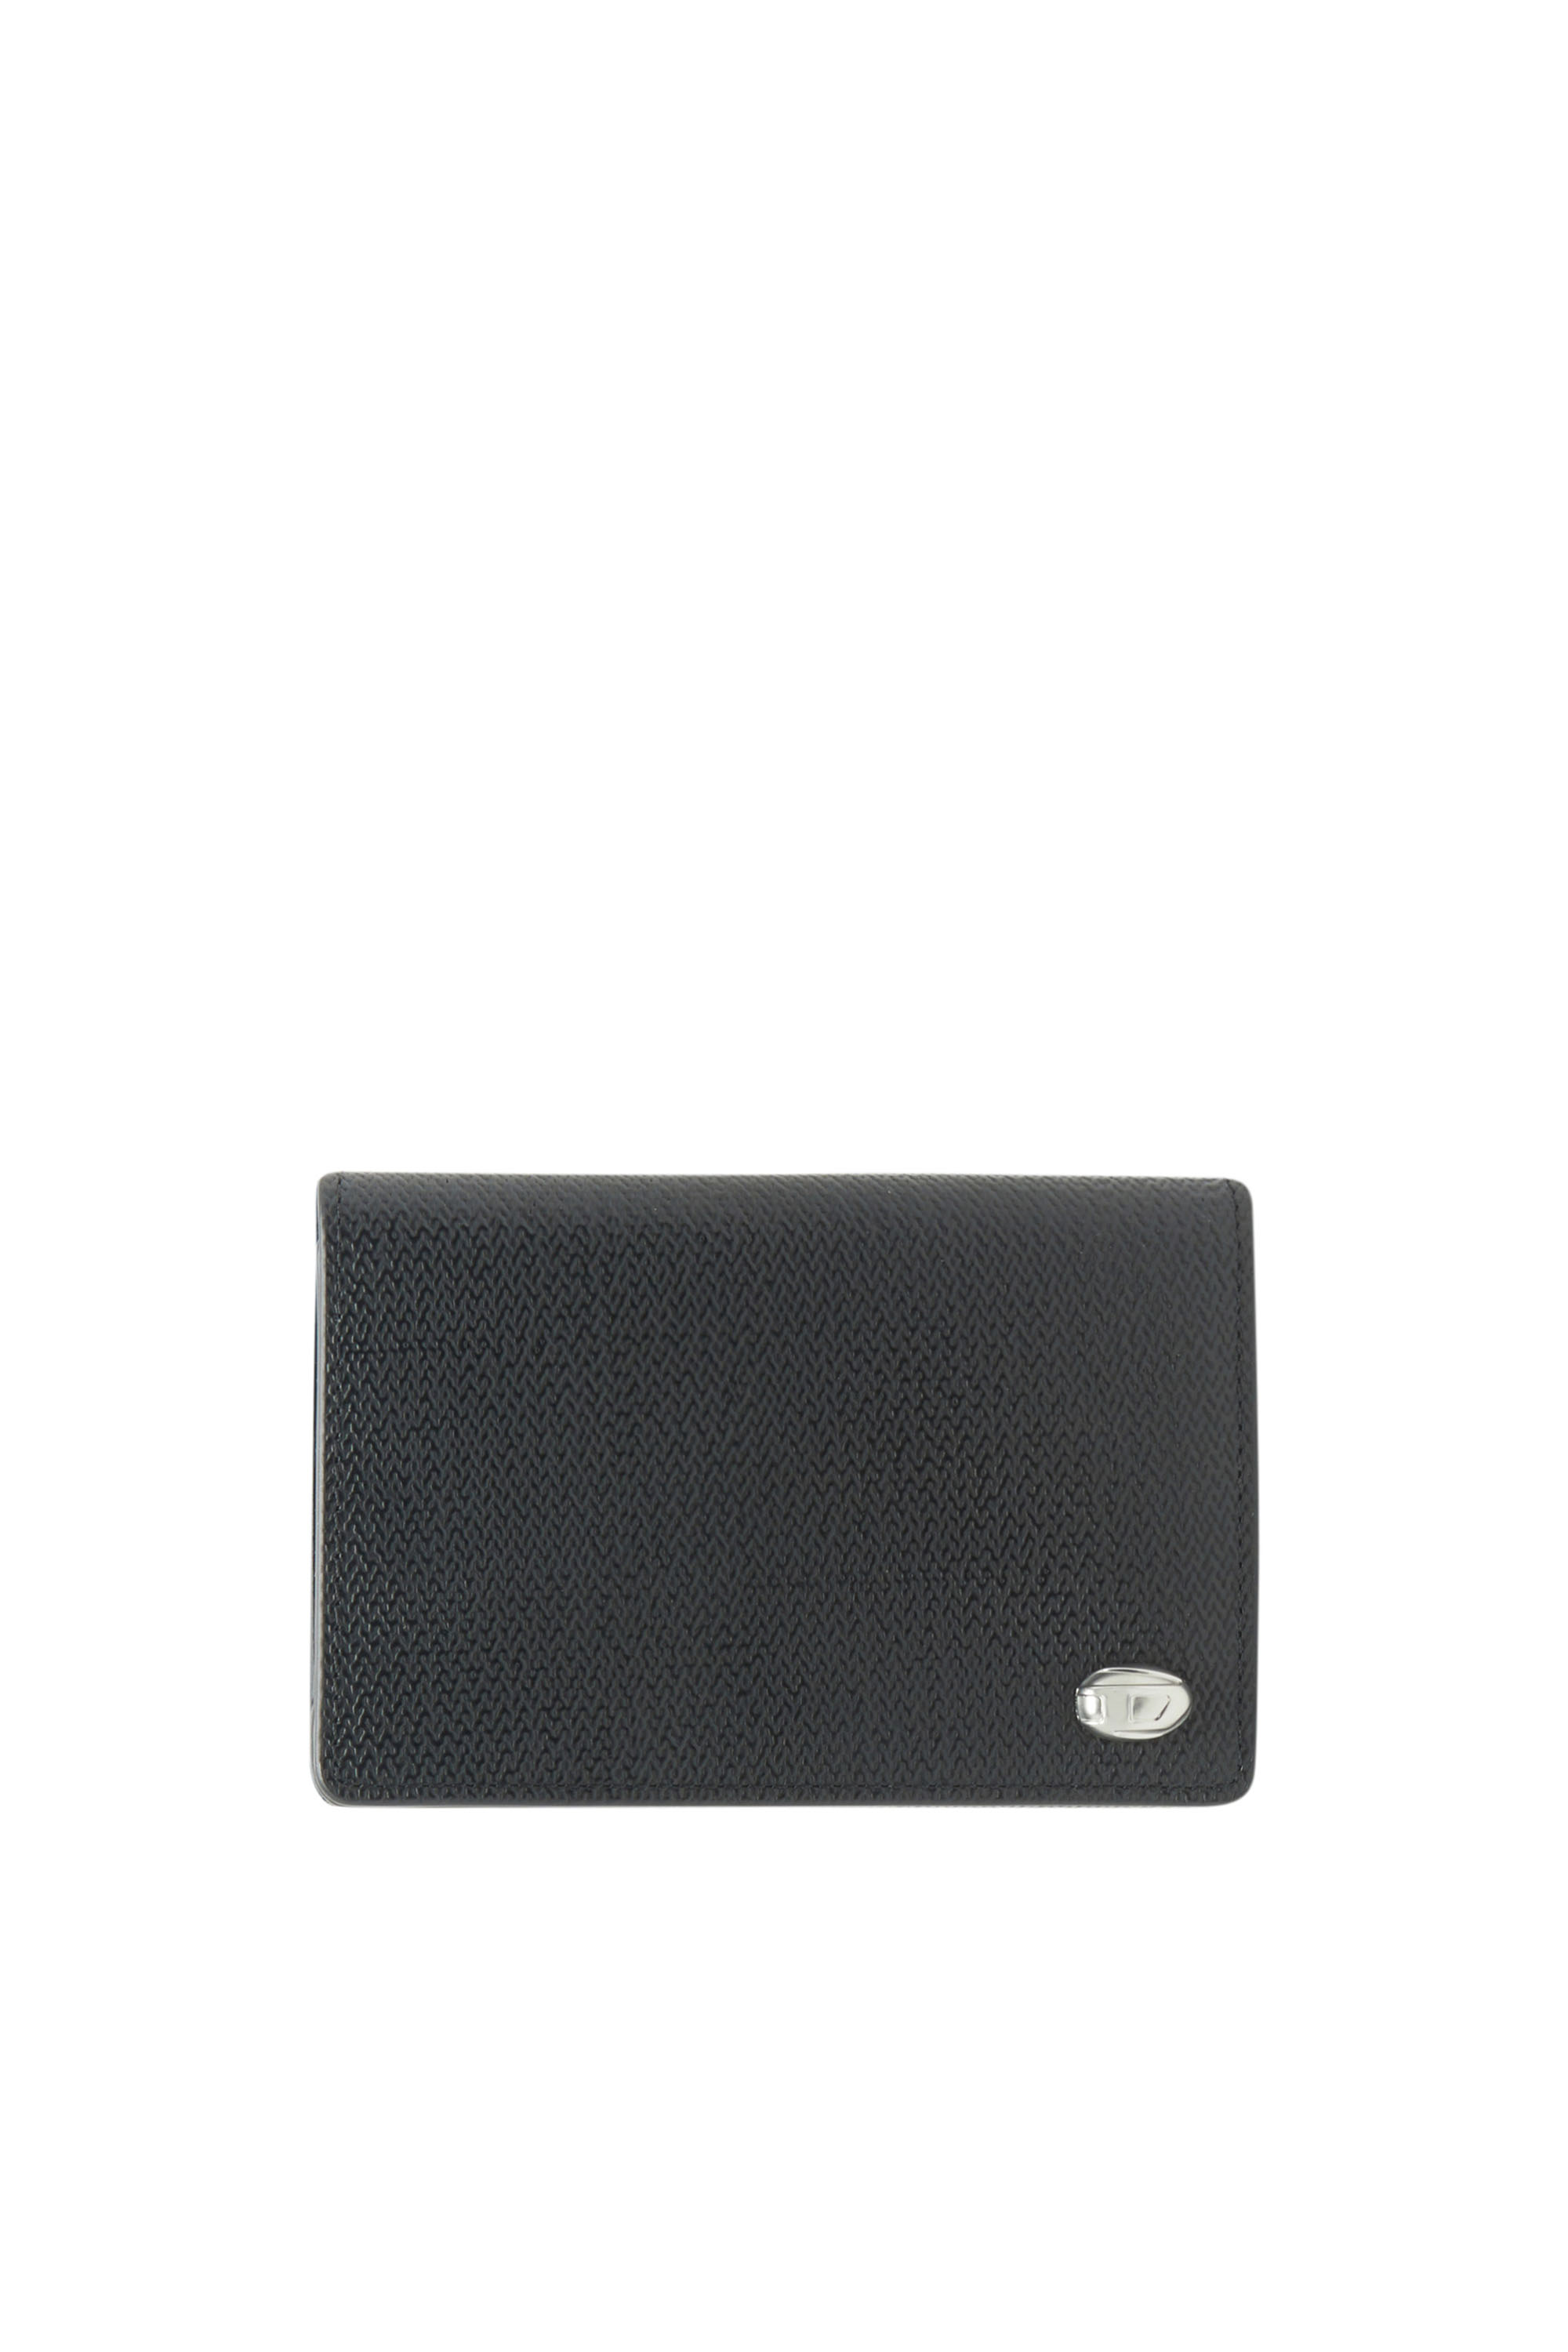 Diesel - Tri-fold wallet in textured leather - Small Wallets - Man - Black